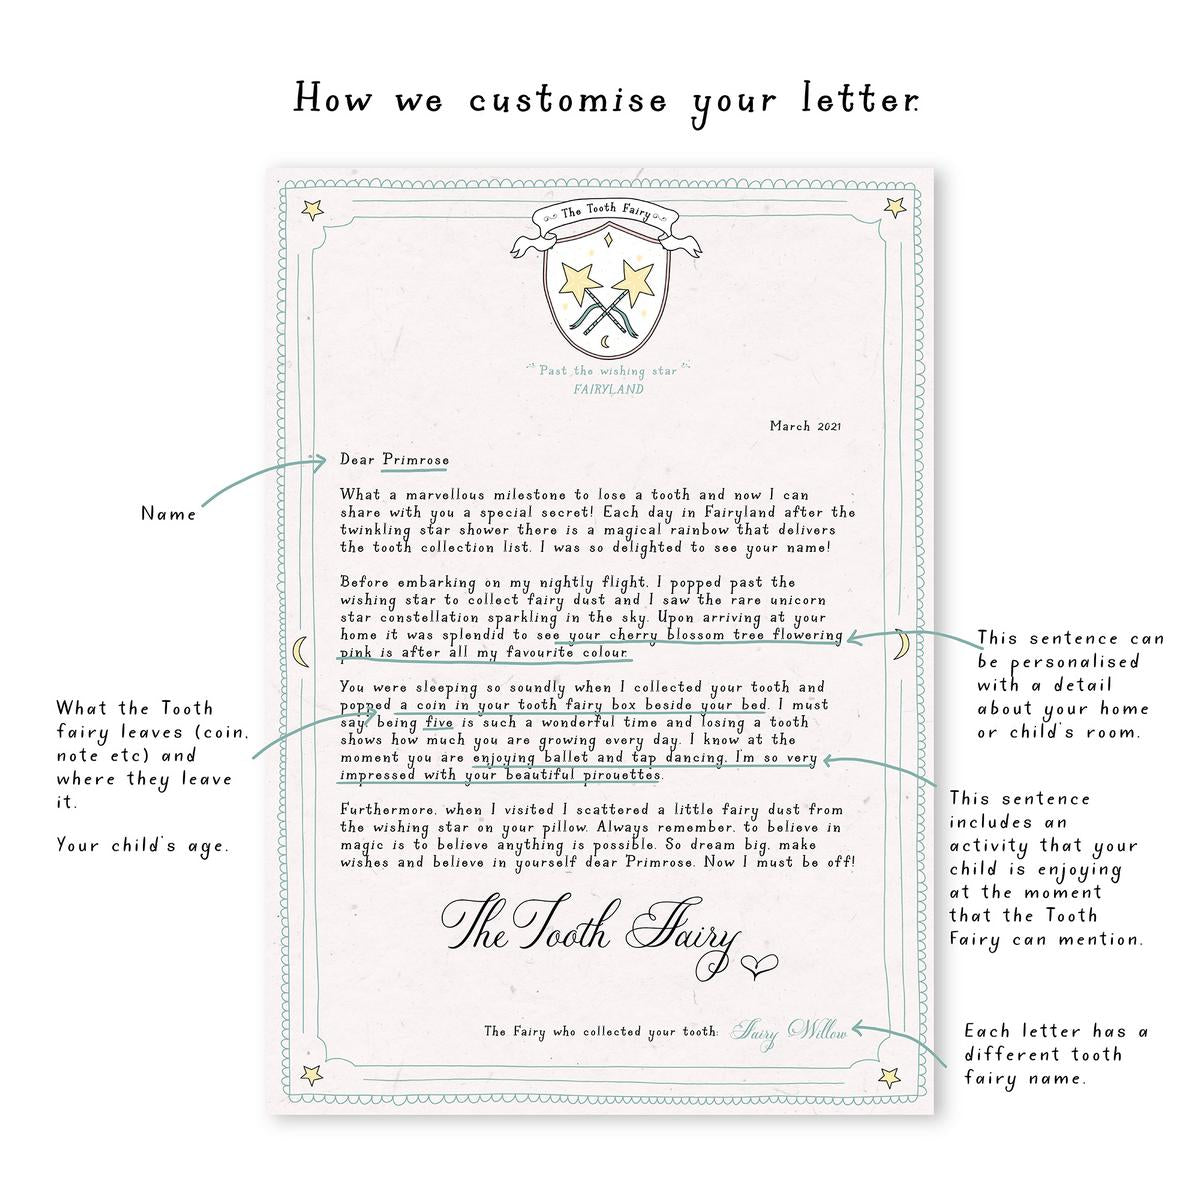 The Tooth Fairy - personalised letter